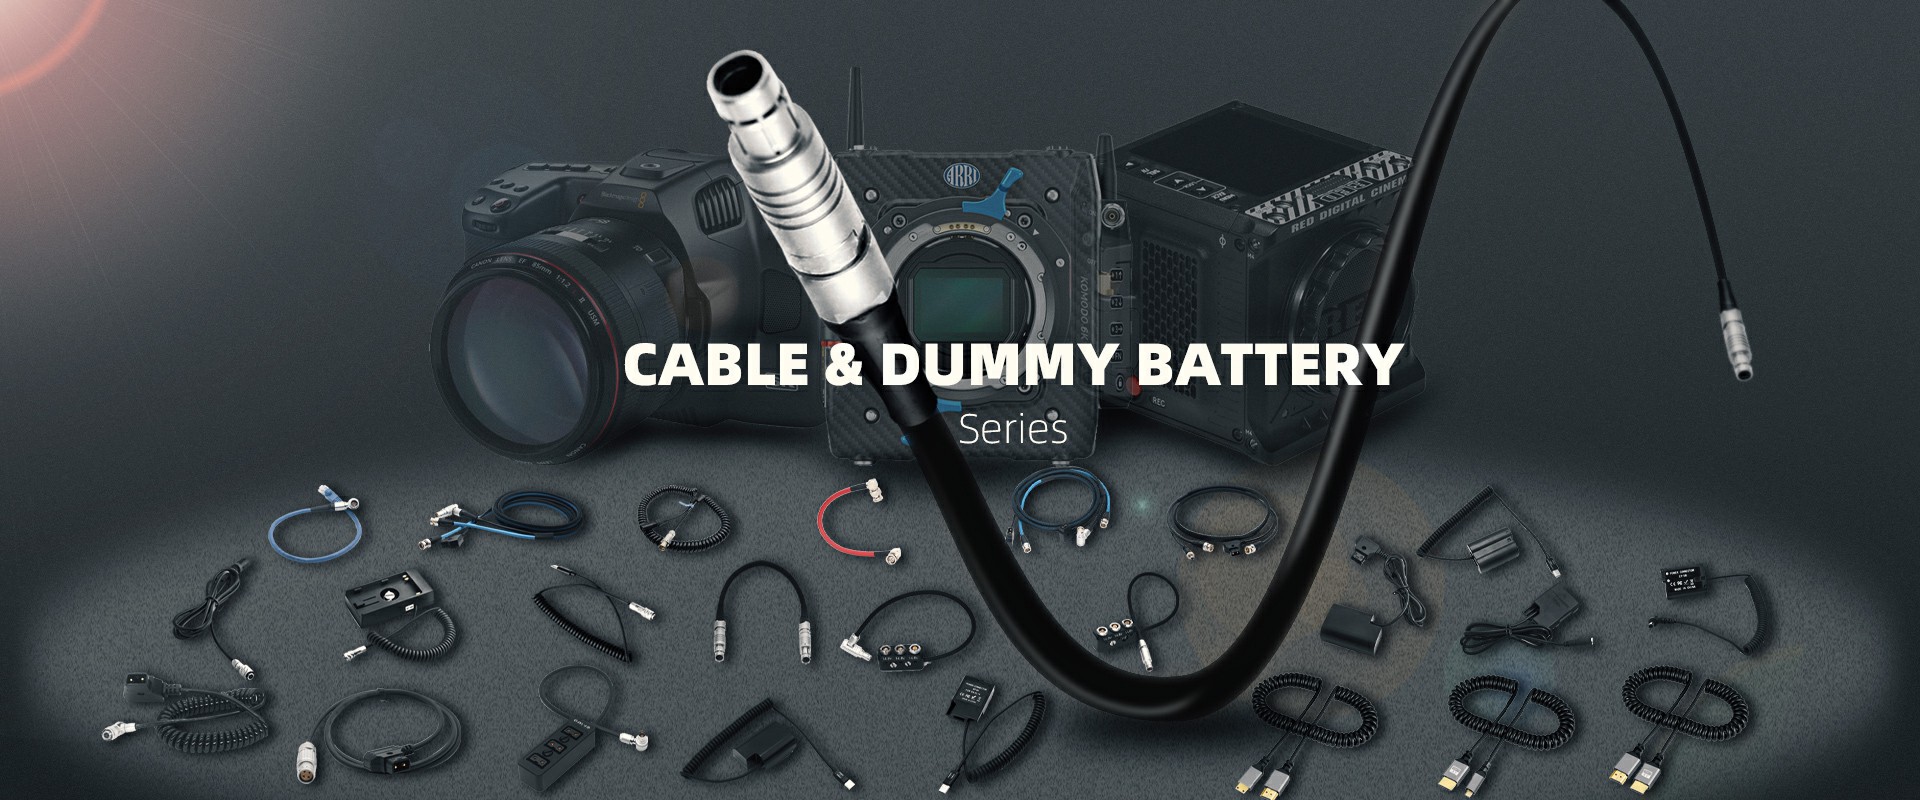 CABLE & DUMMY BATTERY